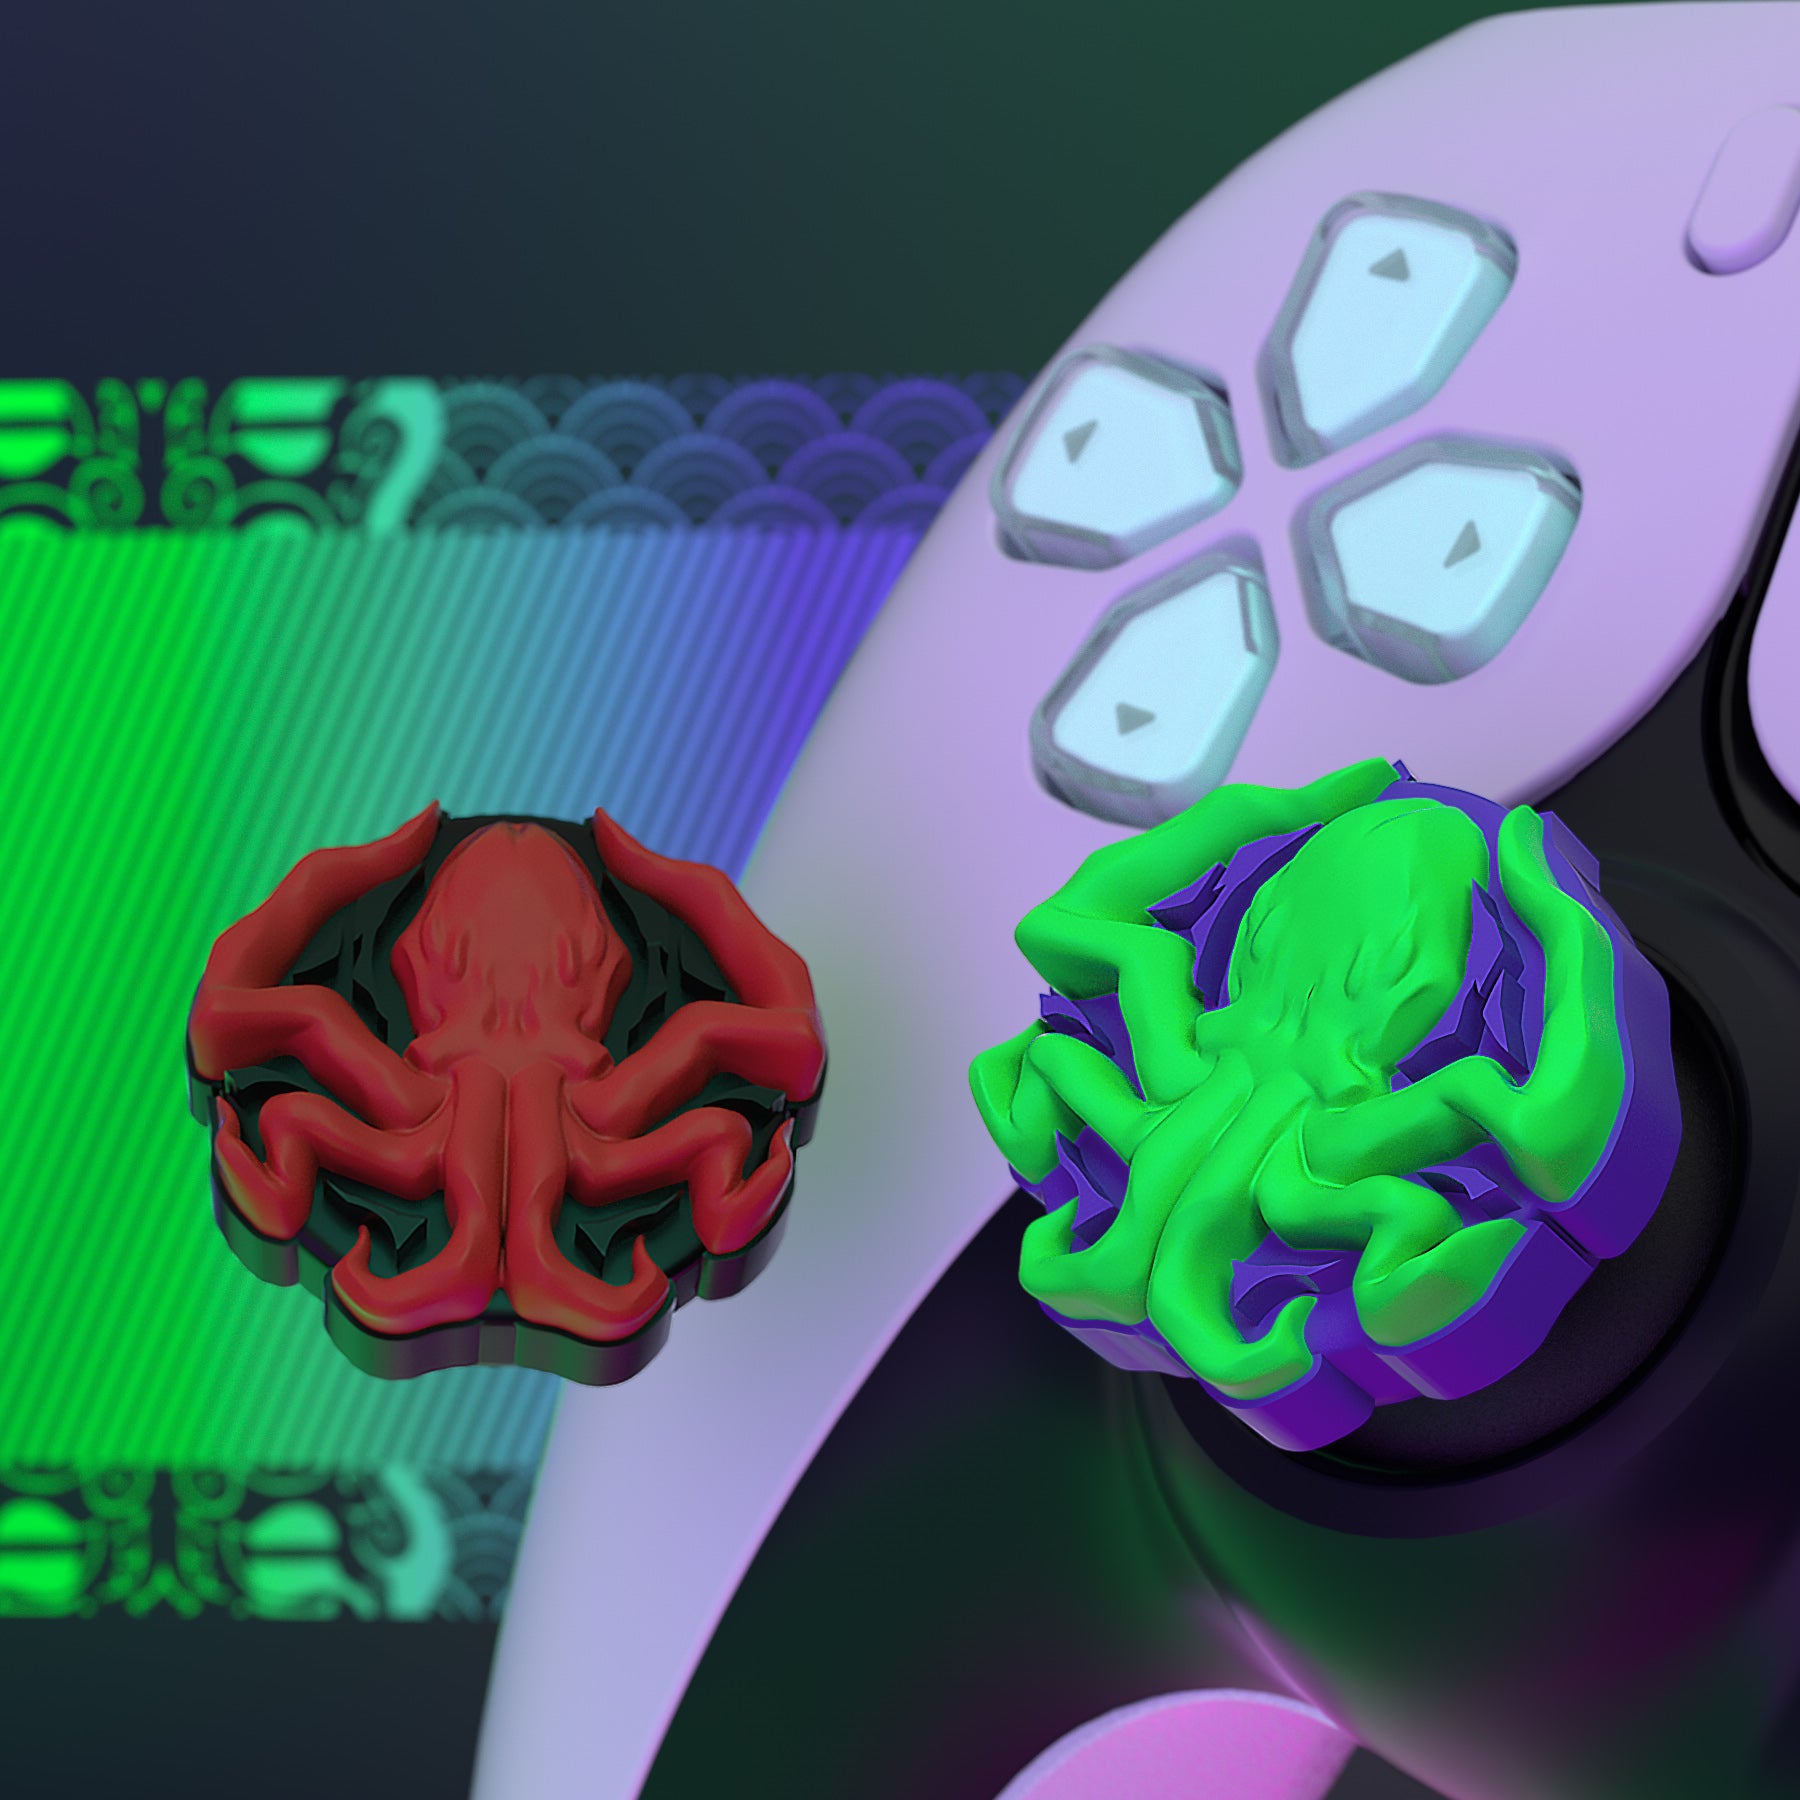 PlayVital Cute Thumb Grip Caps for ps5/4 Controller, Silicone Analog Stick Caps Cover for Xbox Series X/S, Thumbstick Caps for Switch Pro Controller - Cthulhu the Octopus - PJM3028 PlayVital